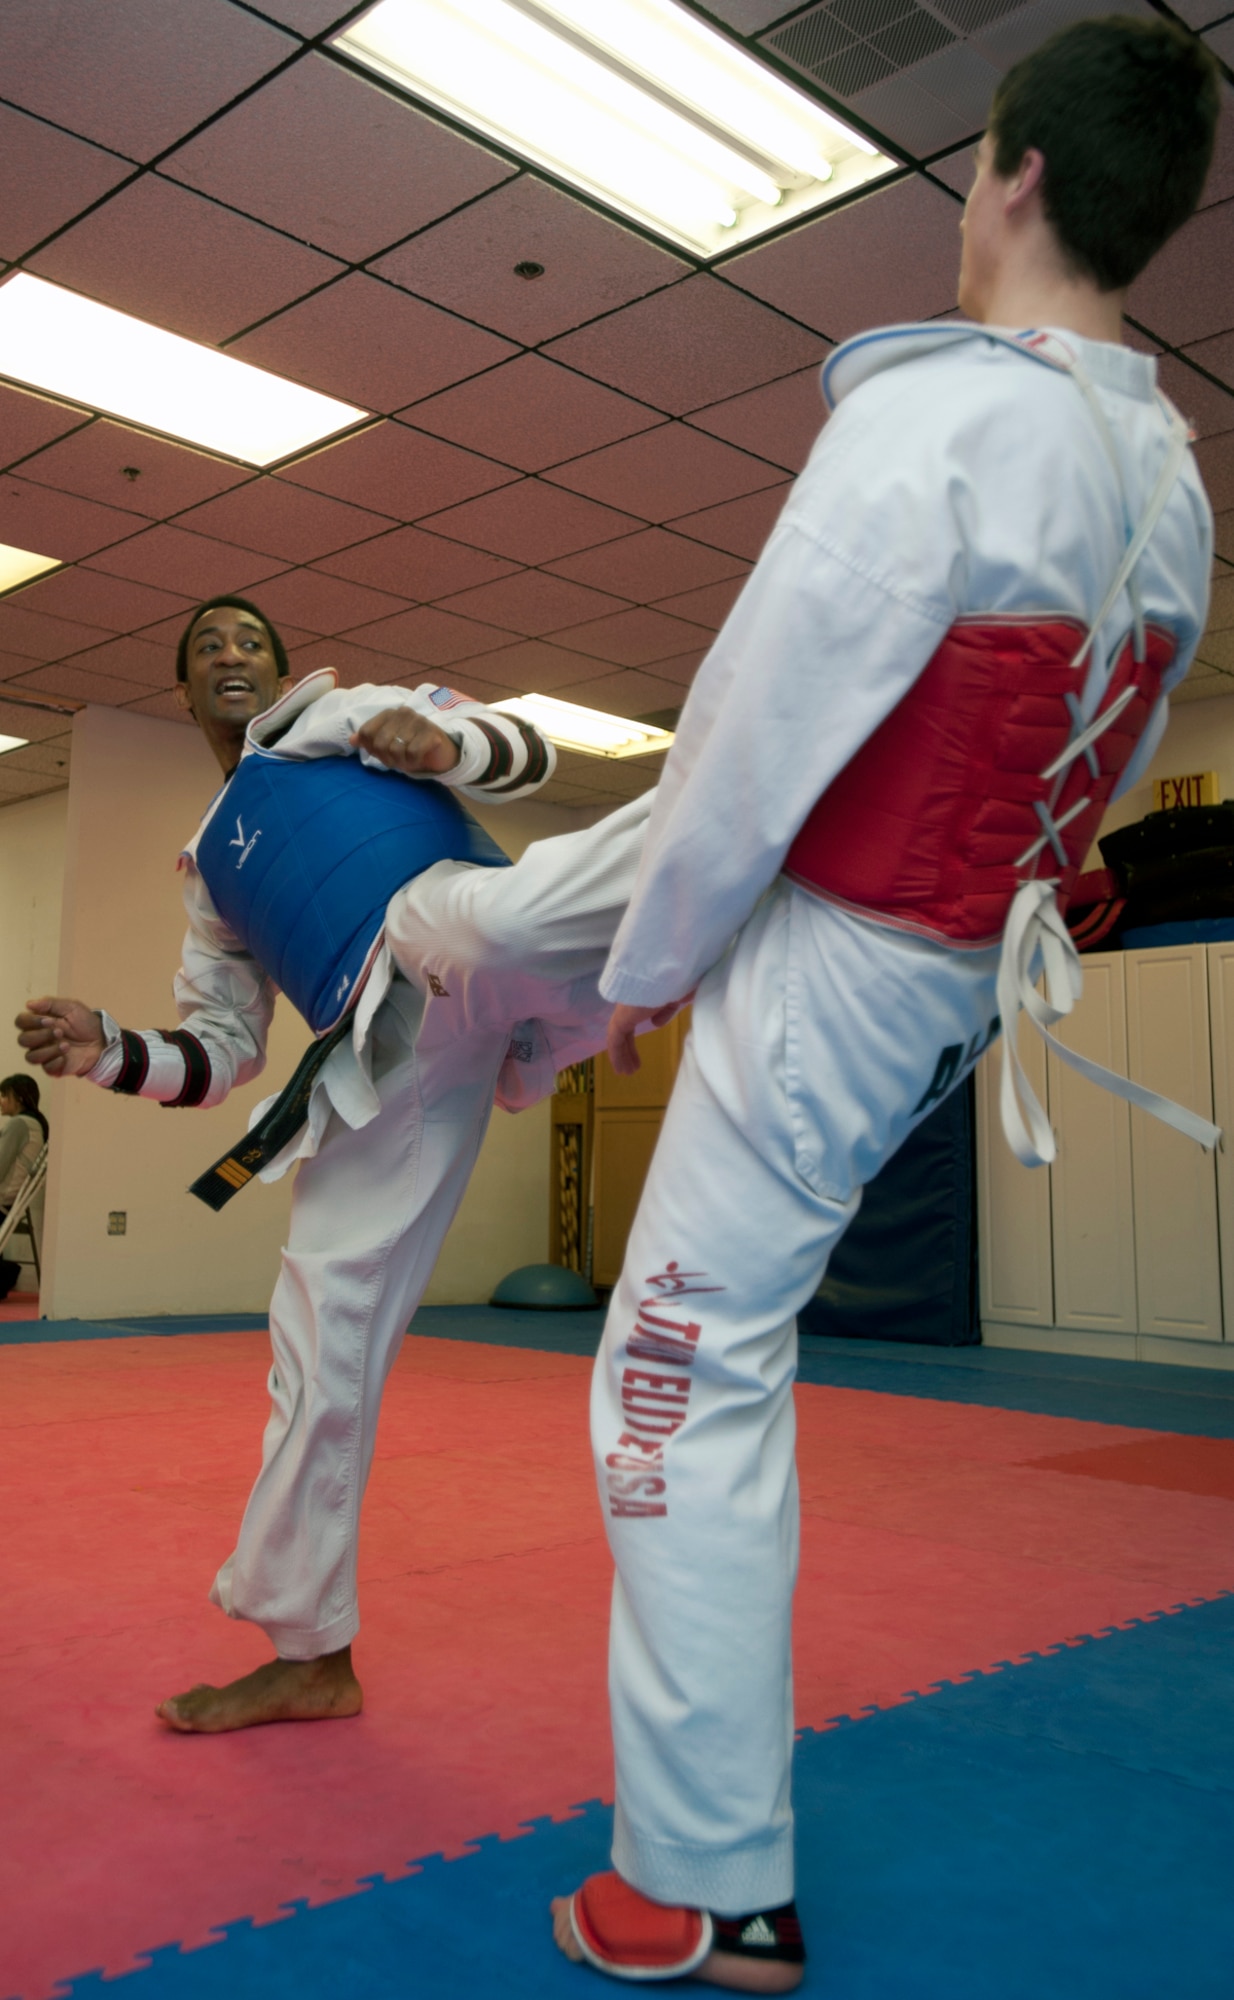 Tech. Sgt. Quinton Beach trains during a Taekwondo Elite USA class in Anchorage, March 7, 2014. Beach is a member of the United States Air Force Olympic Taekwondo team. (U.S. Air Force photo/Staff Sgt. Robert Barnett)